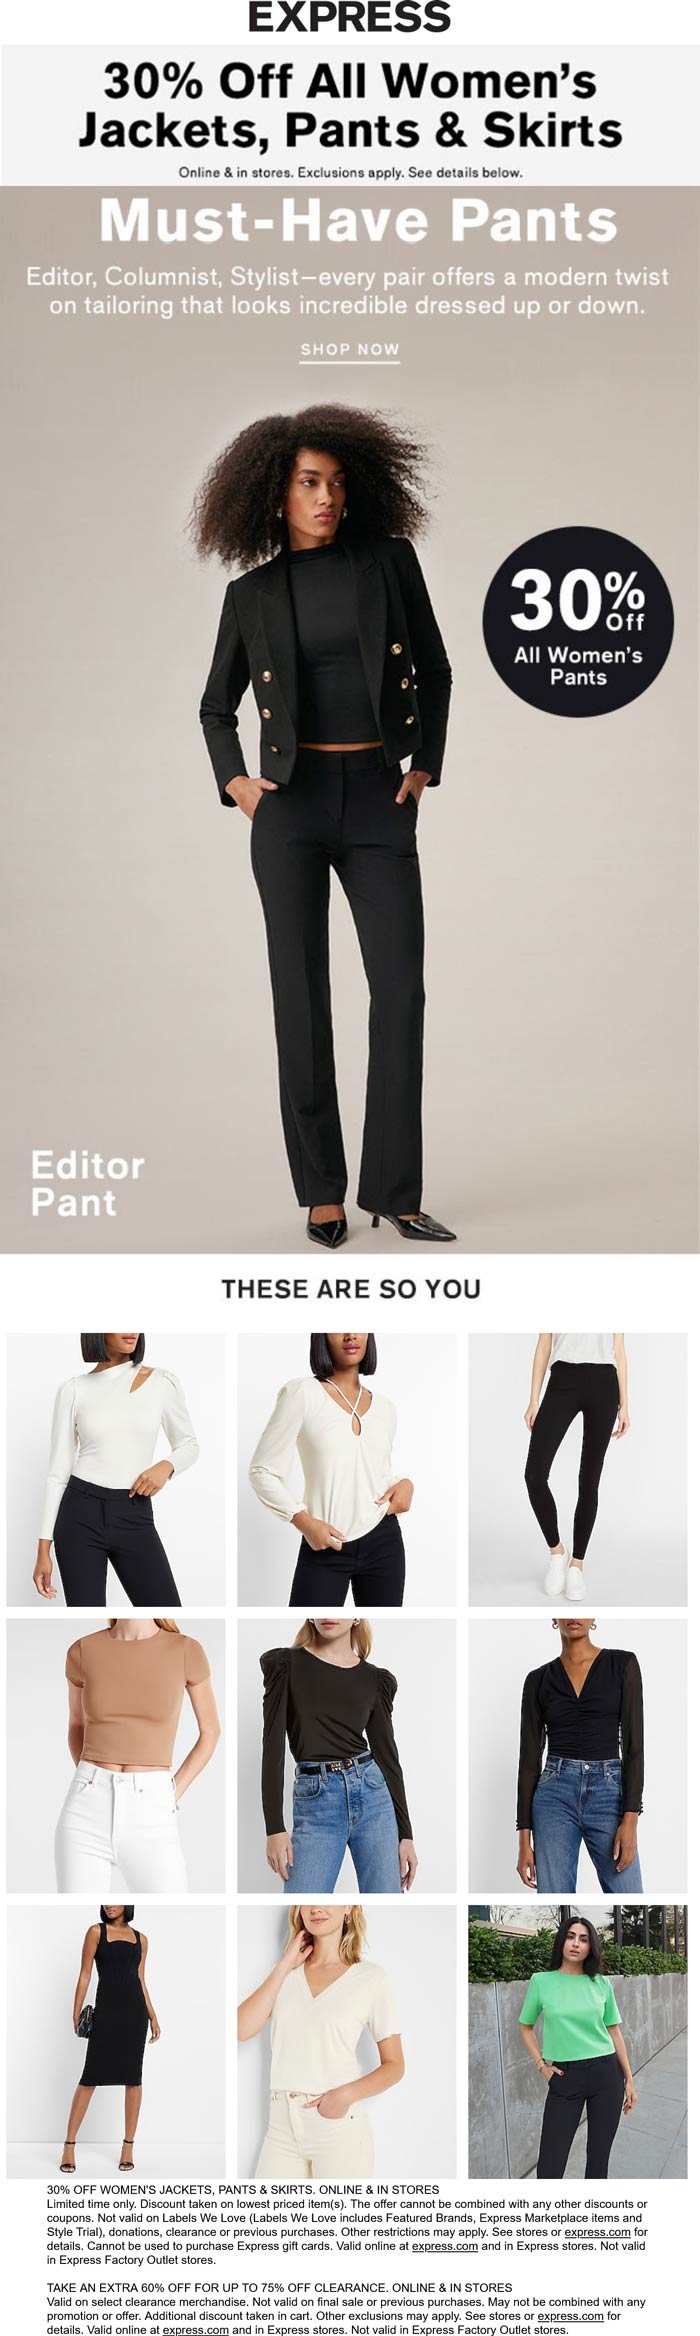 Express stores Coupon  30% off pants skirts & jackets at Express, ditto online #express 